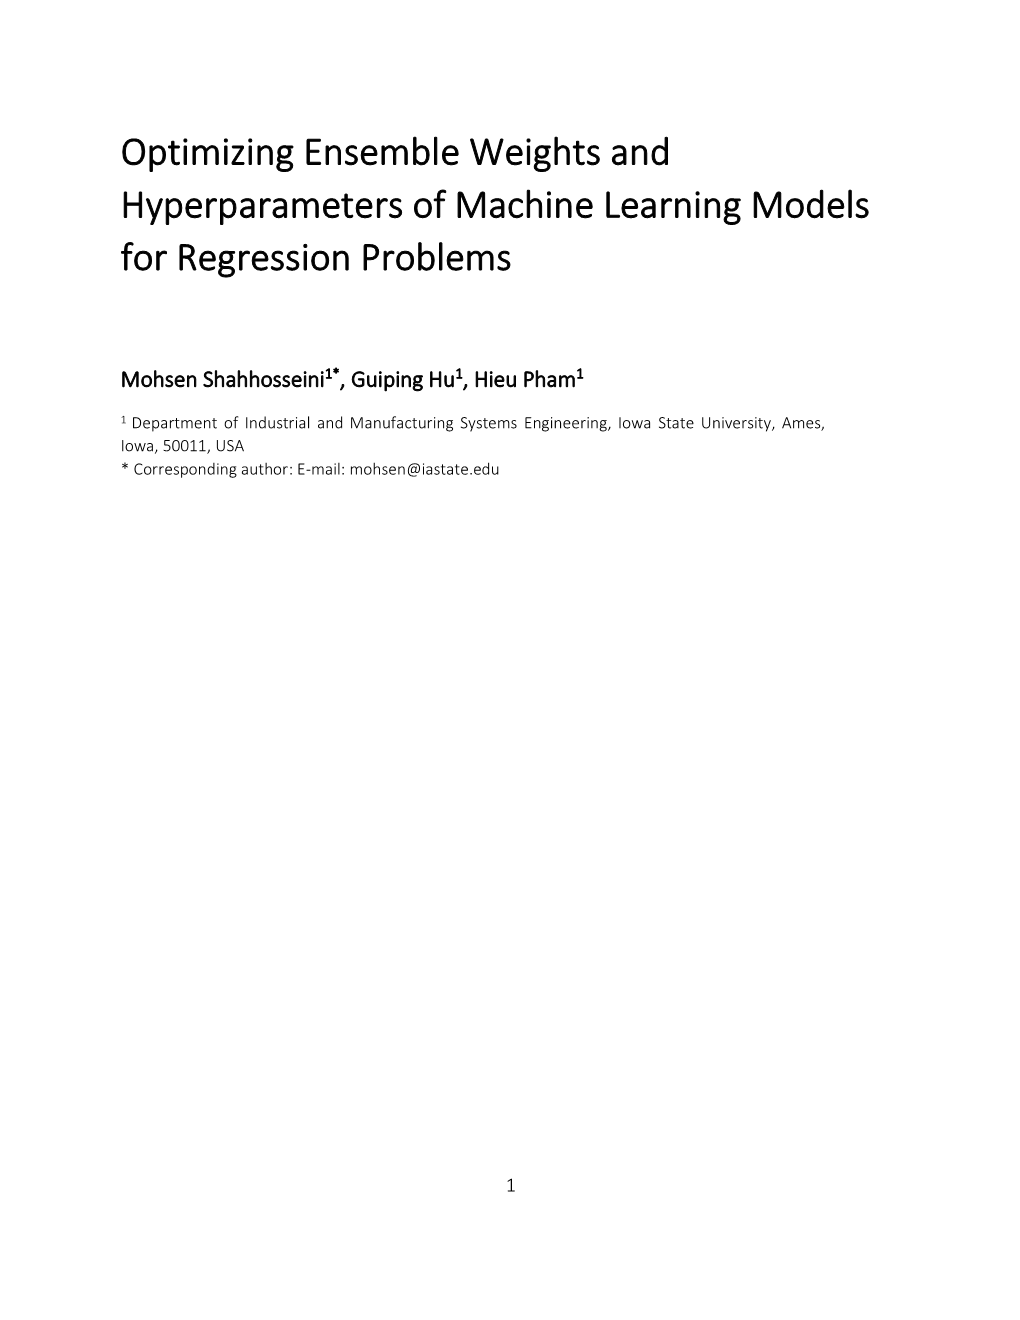 Optimizing Ensemble Weights and Hyperparameters of Machine Learning Models for Regression Problems